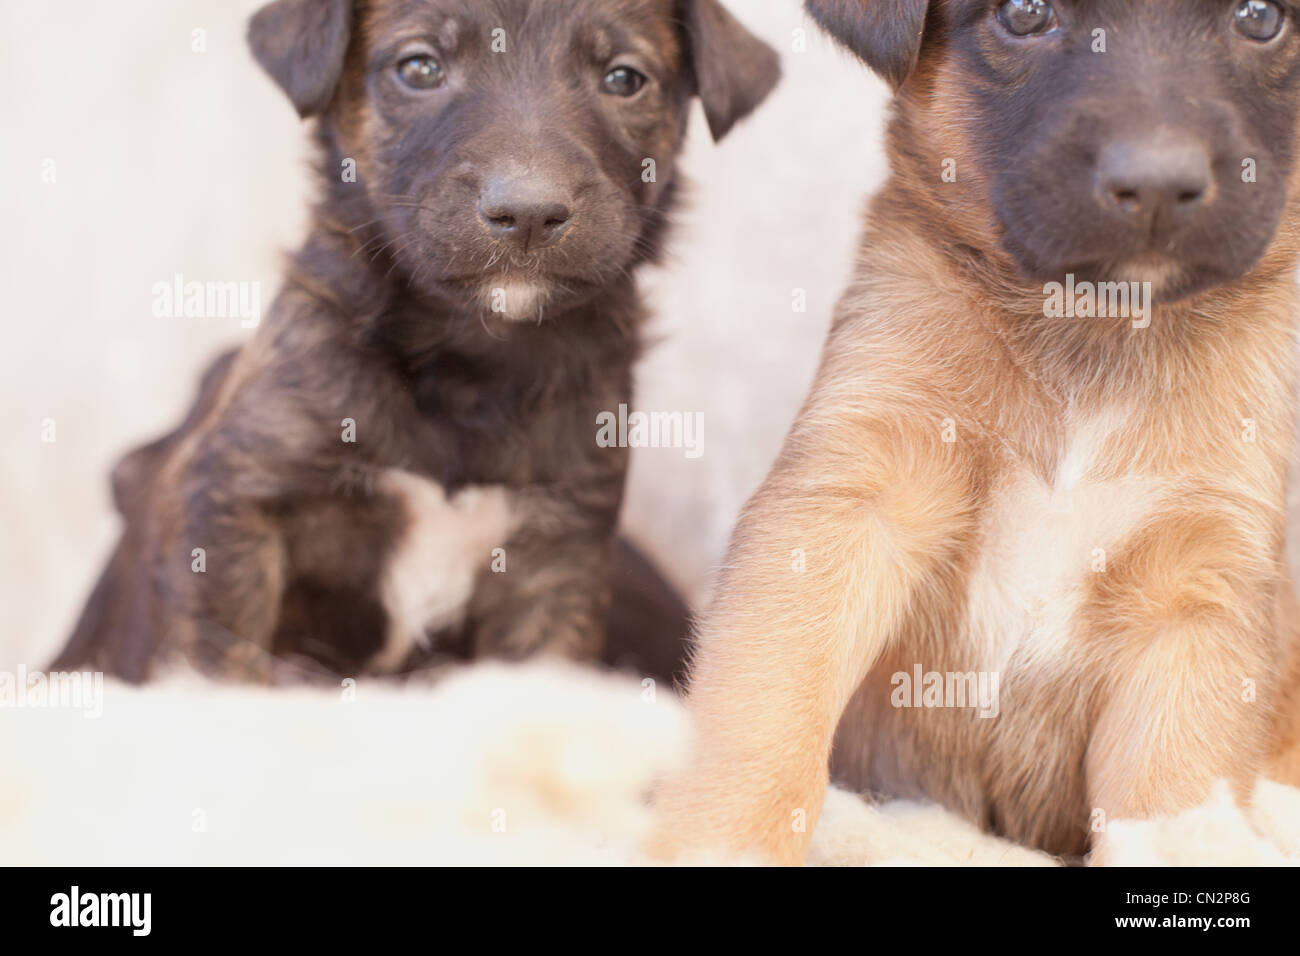 Two puppies, close up Stock Photo